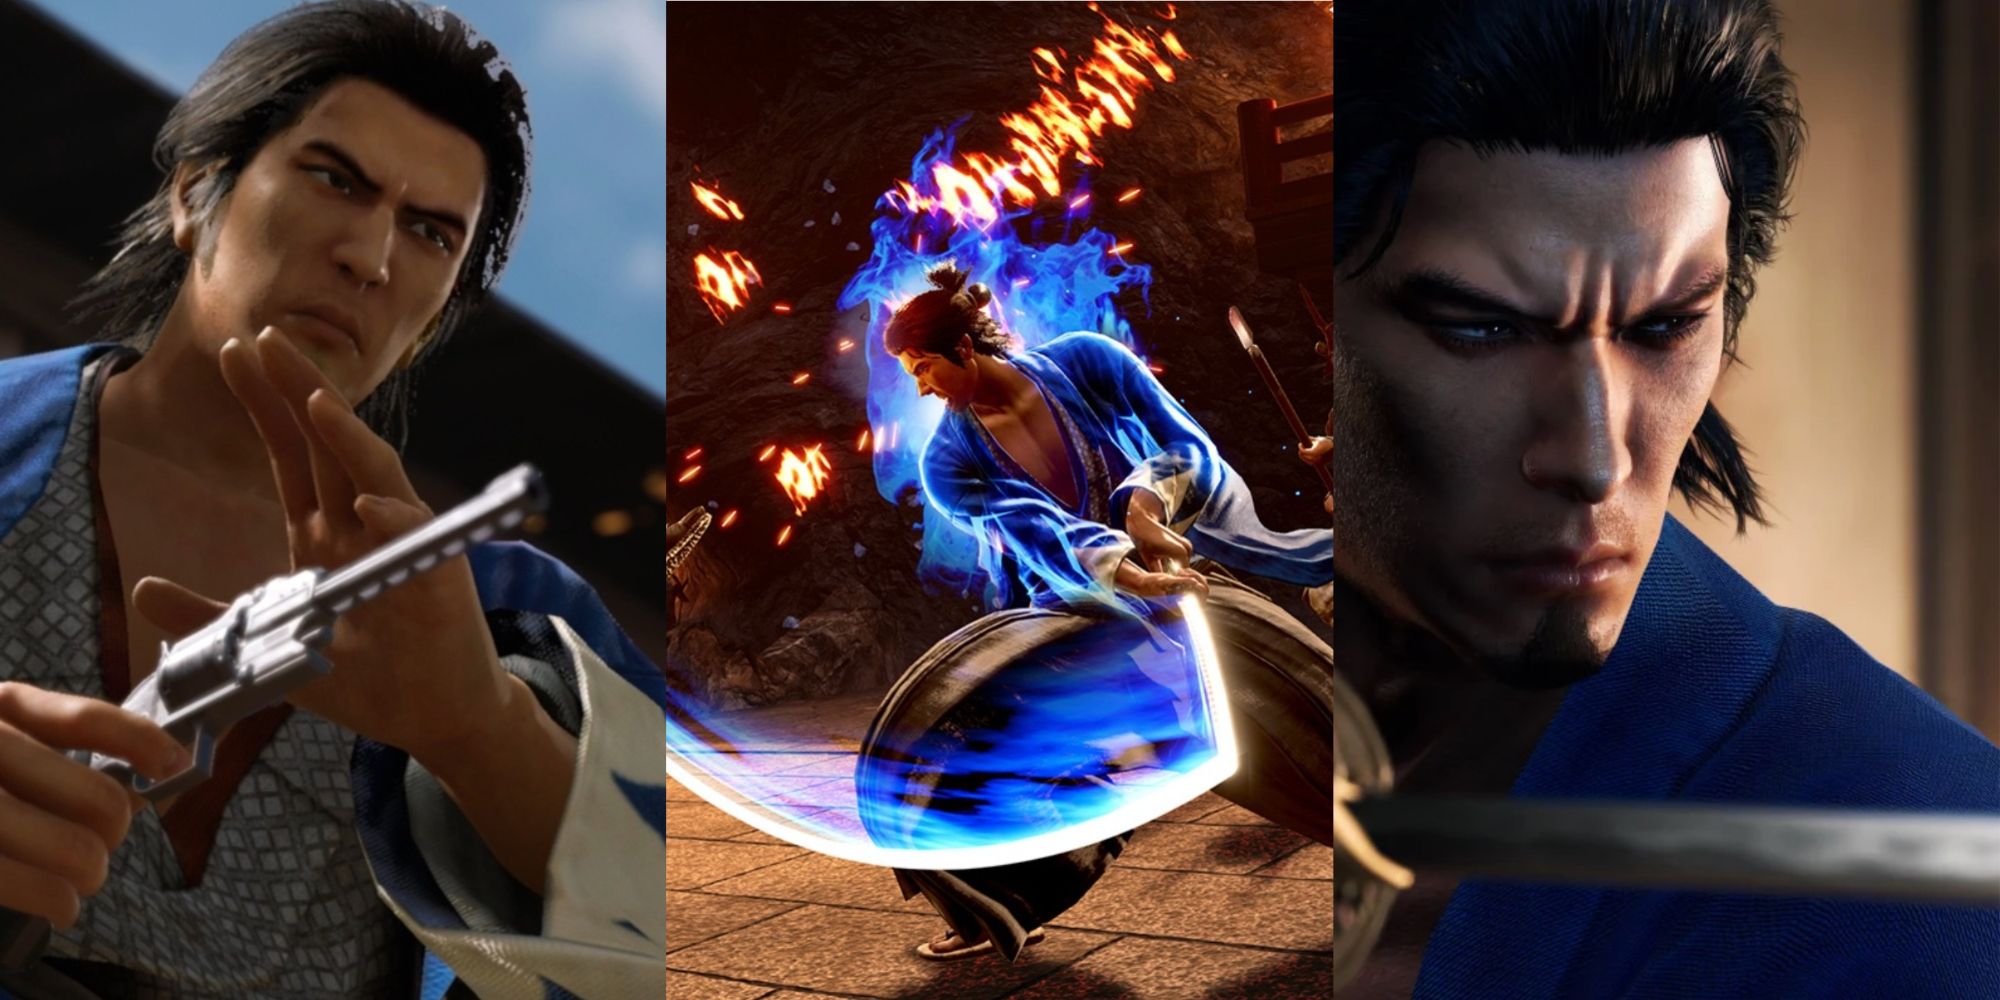 Ryoma fires a gun. Ryoma slashing through his opposition with a katana. Ryoma taking a fighting stance with his blade in Like a Dragon: Ishin.